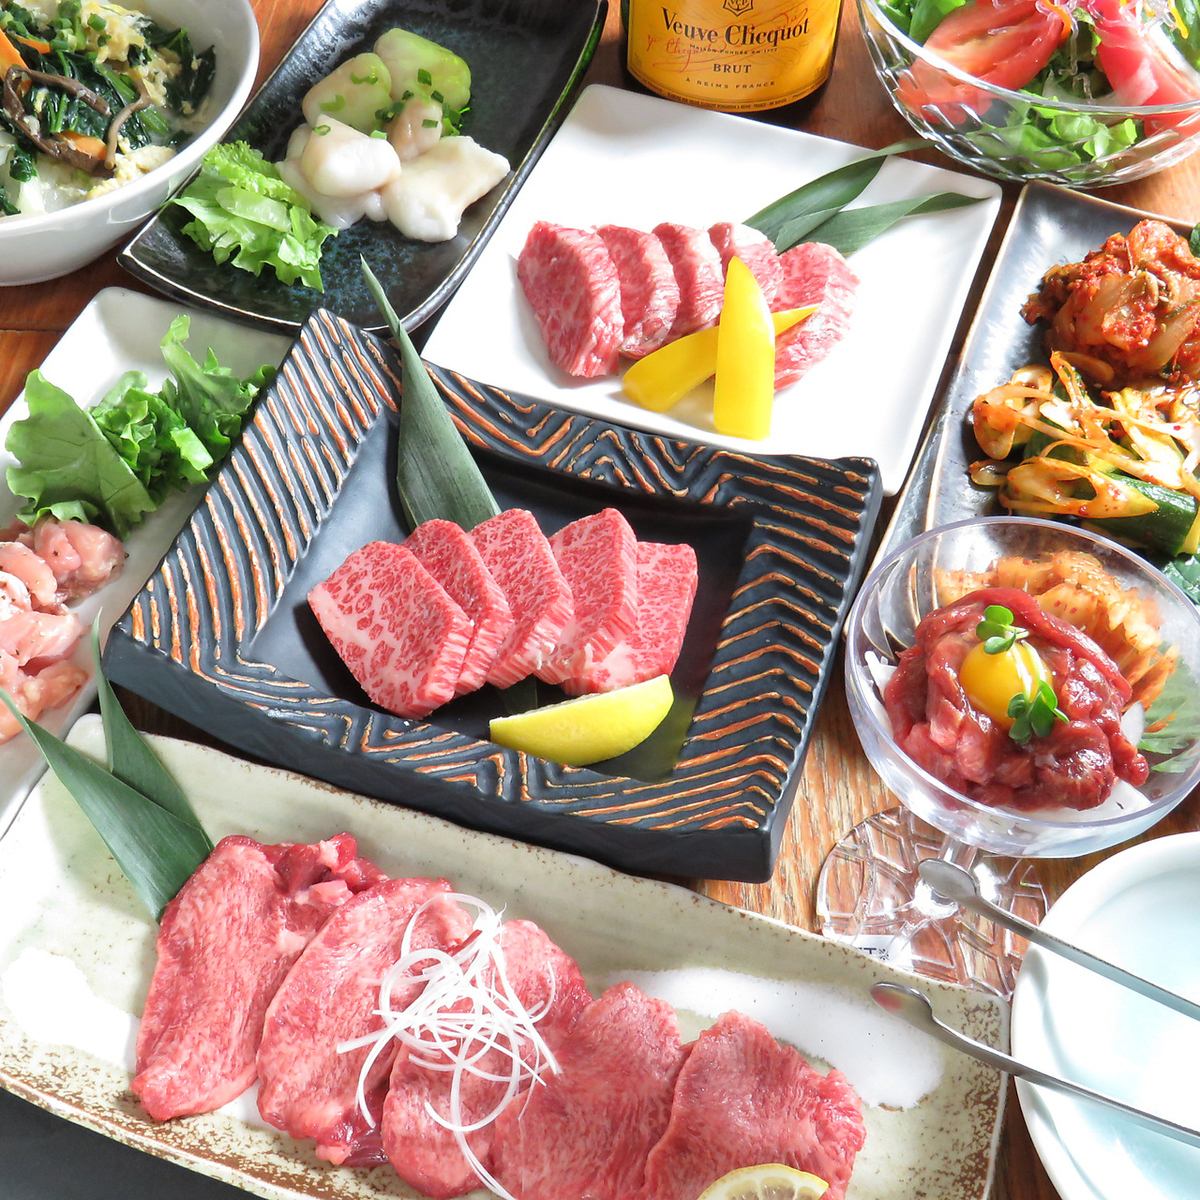 Buy directly from Shibaura Meat Center! We offer fresh Japanese black beef at a reasonable price starting from 980 yen!